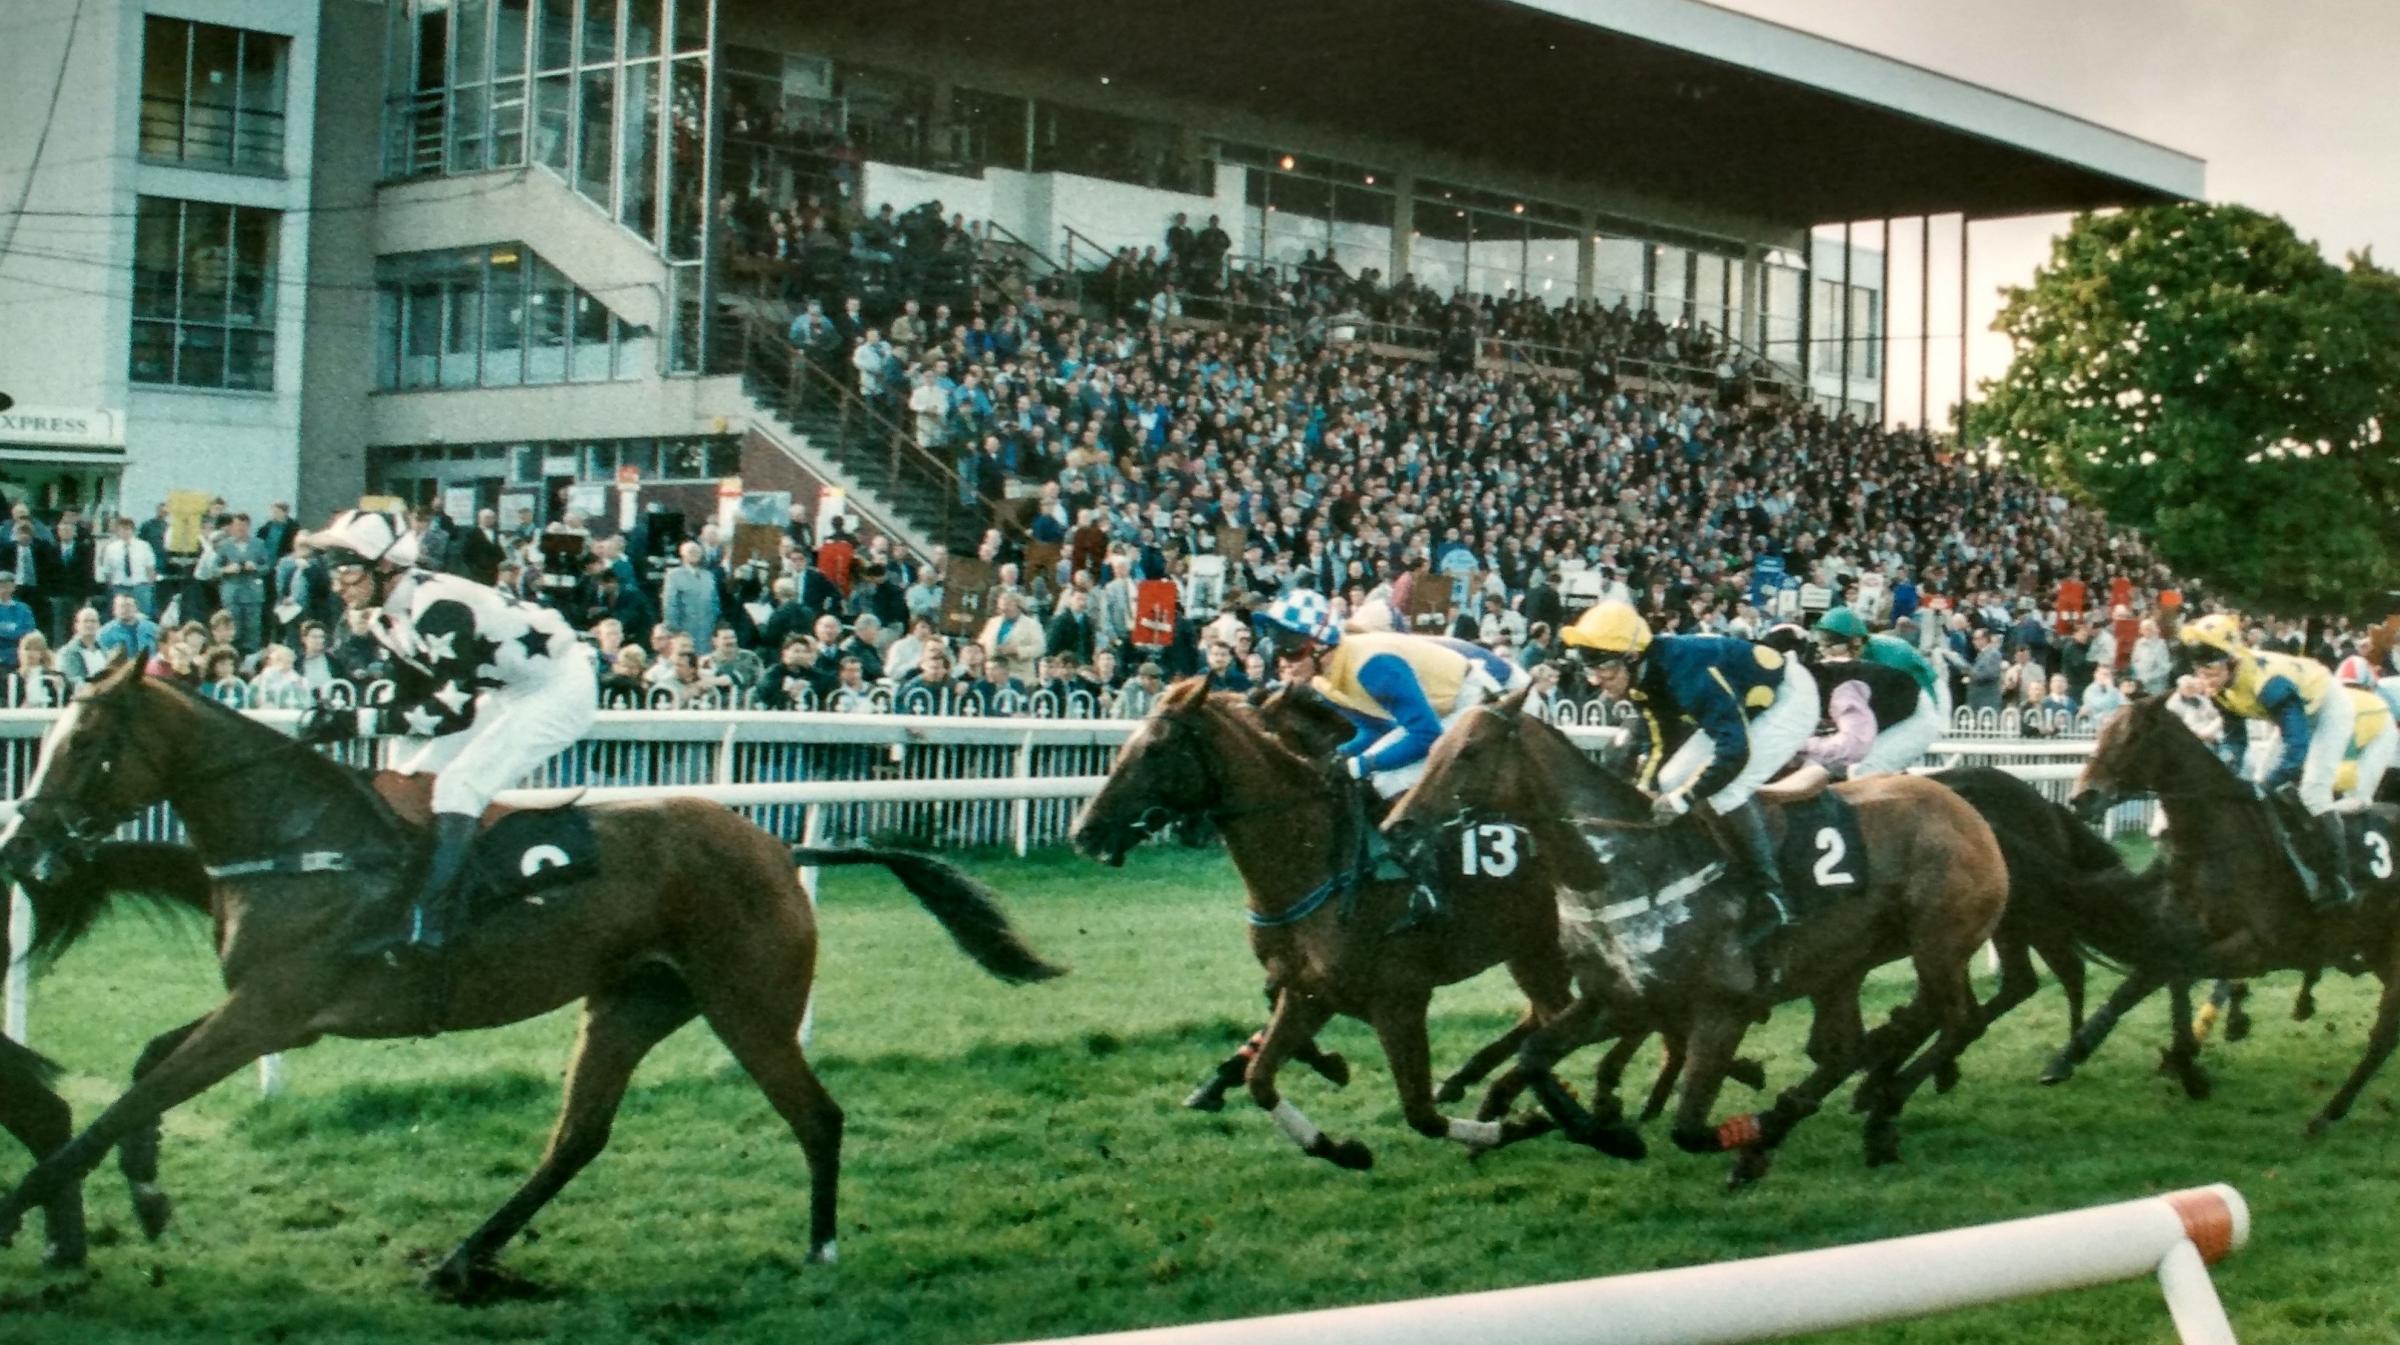 A packed grandstand in February 1995